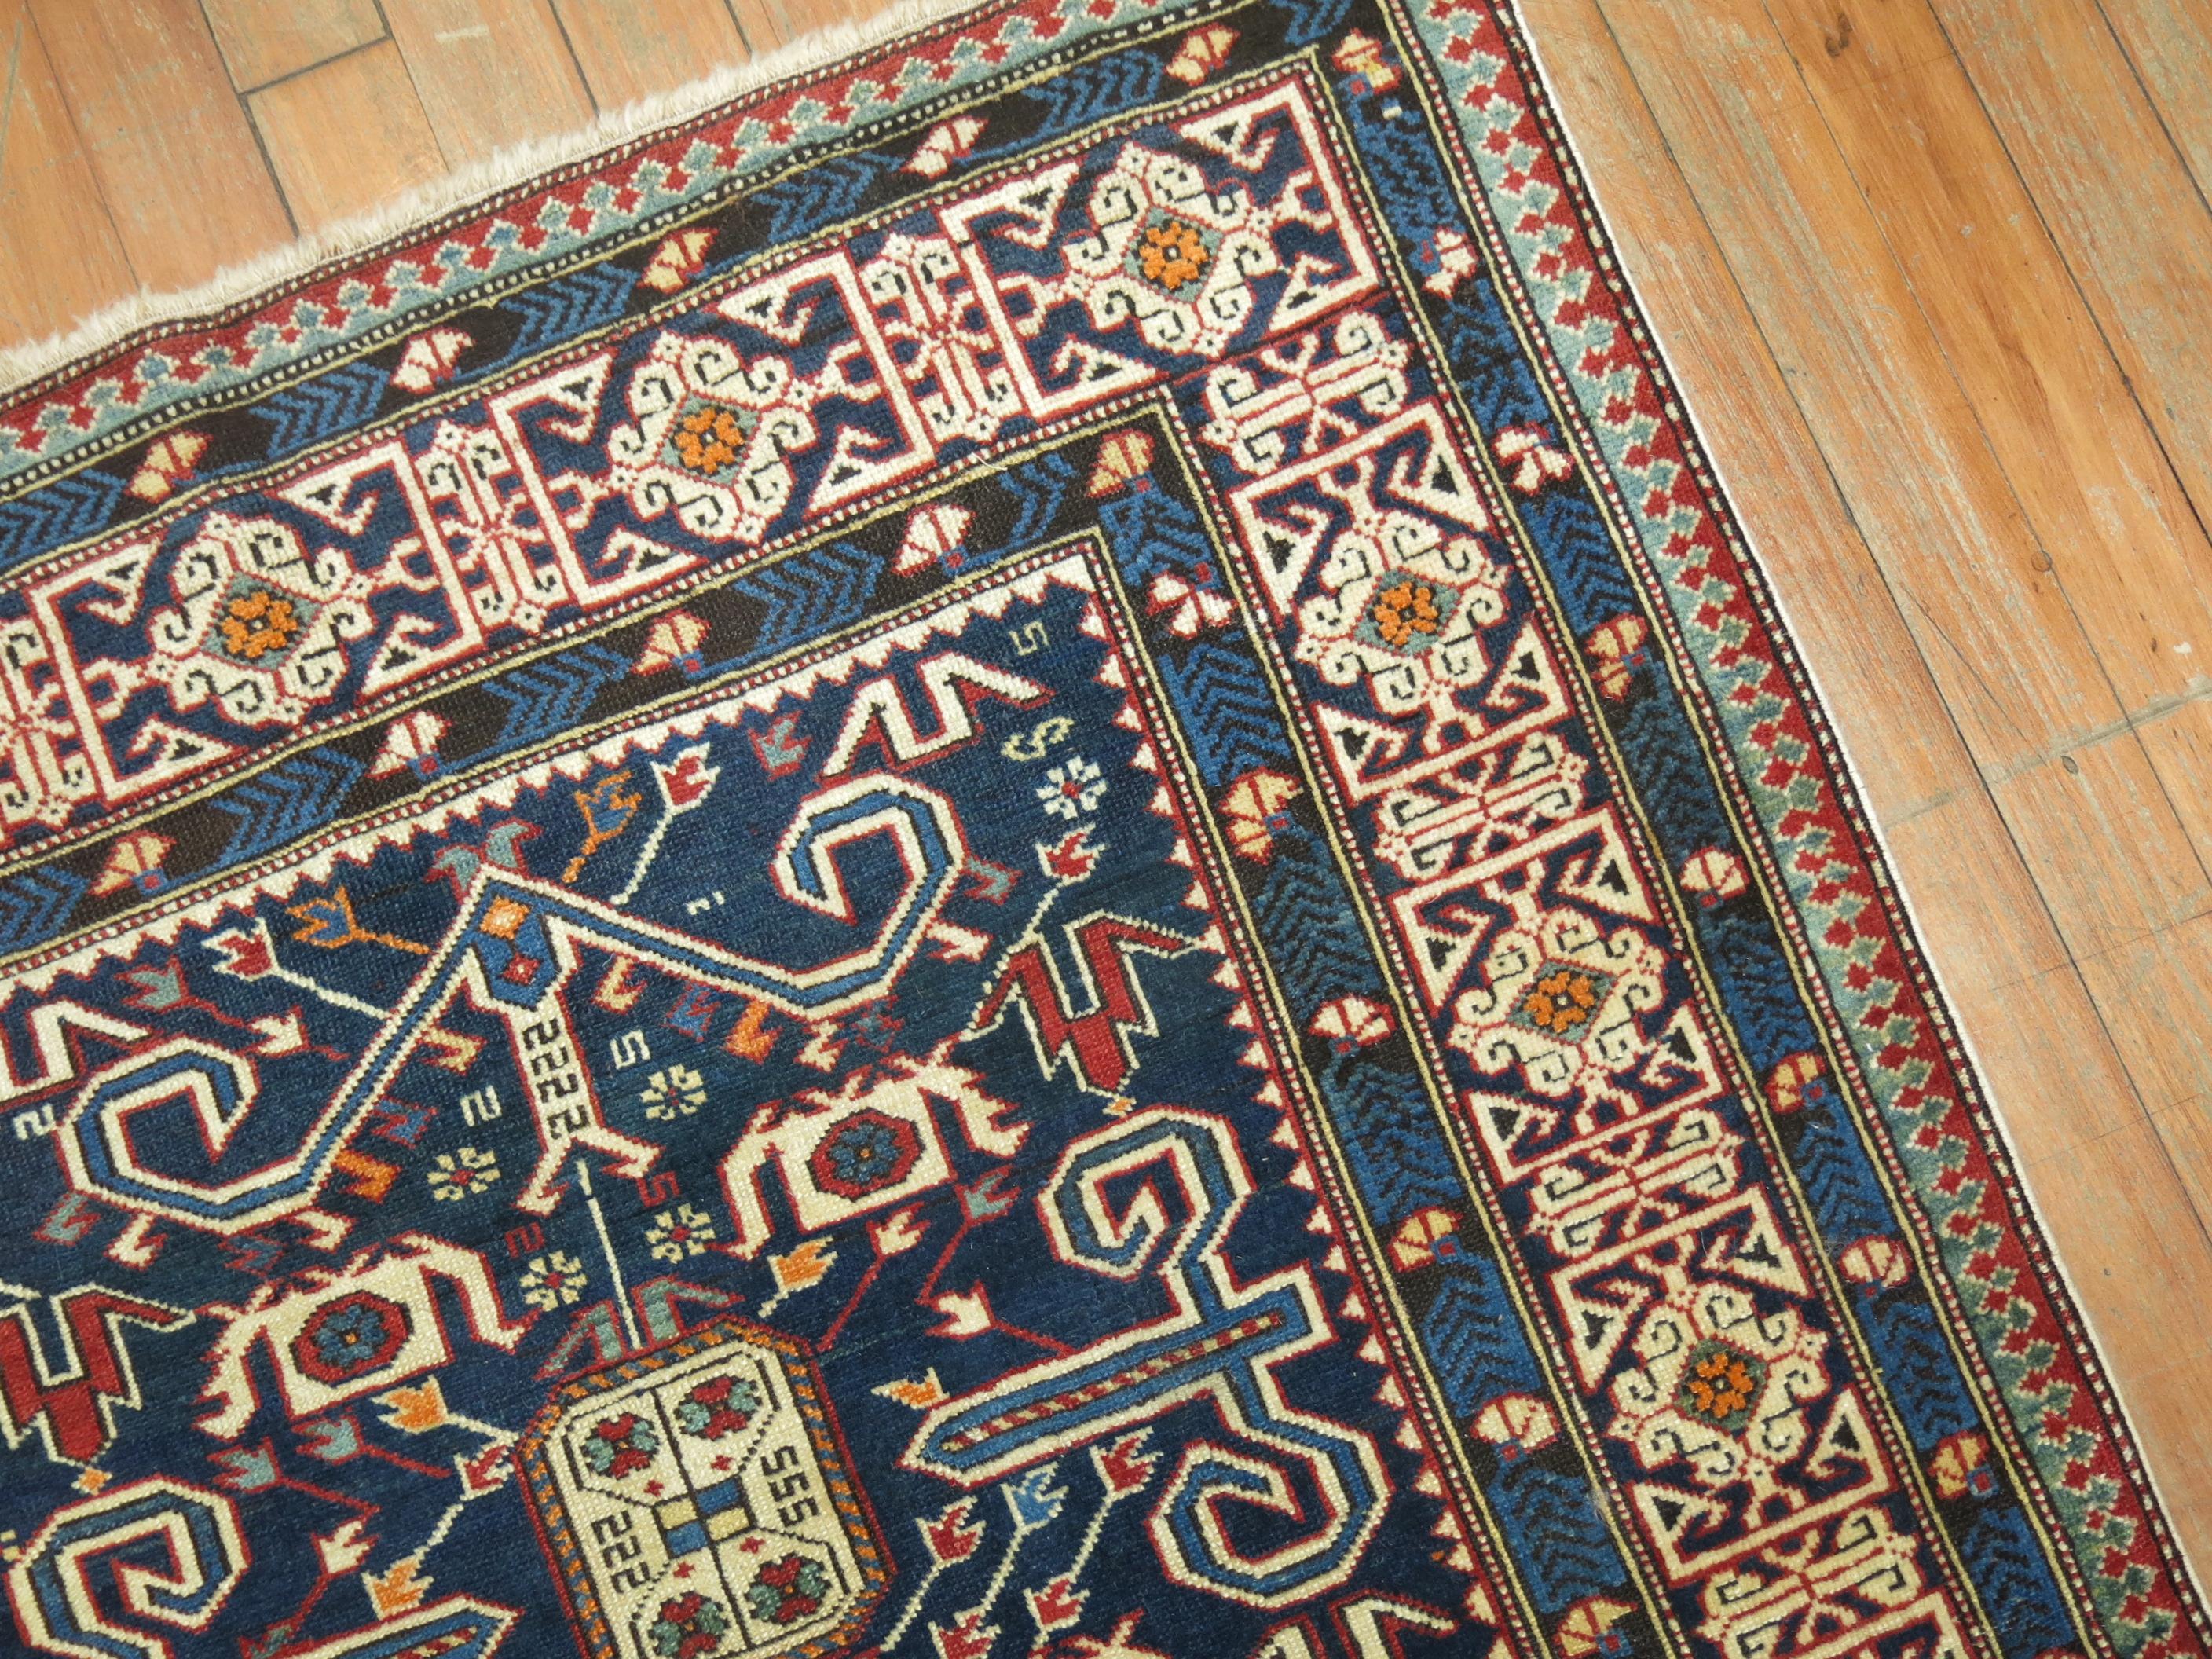 An authentic blue antique Caucasian perdedil rug from the late 19th century, 

Measures: 3' x 4'11